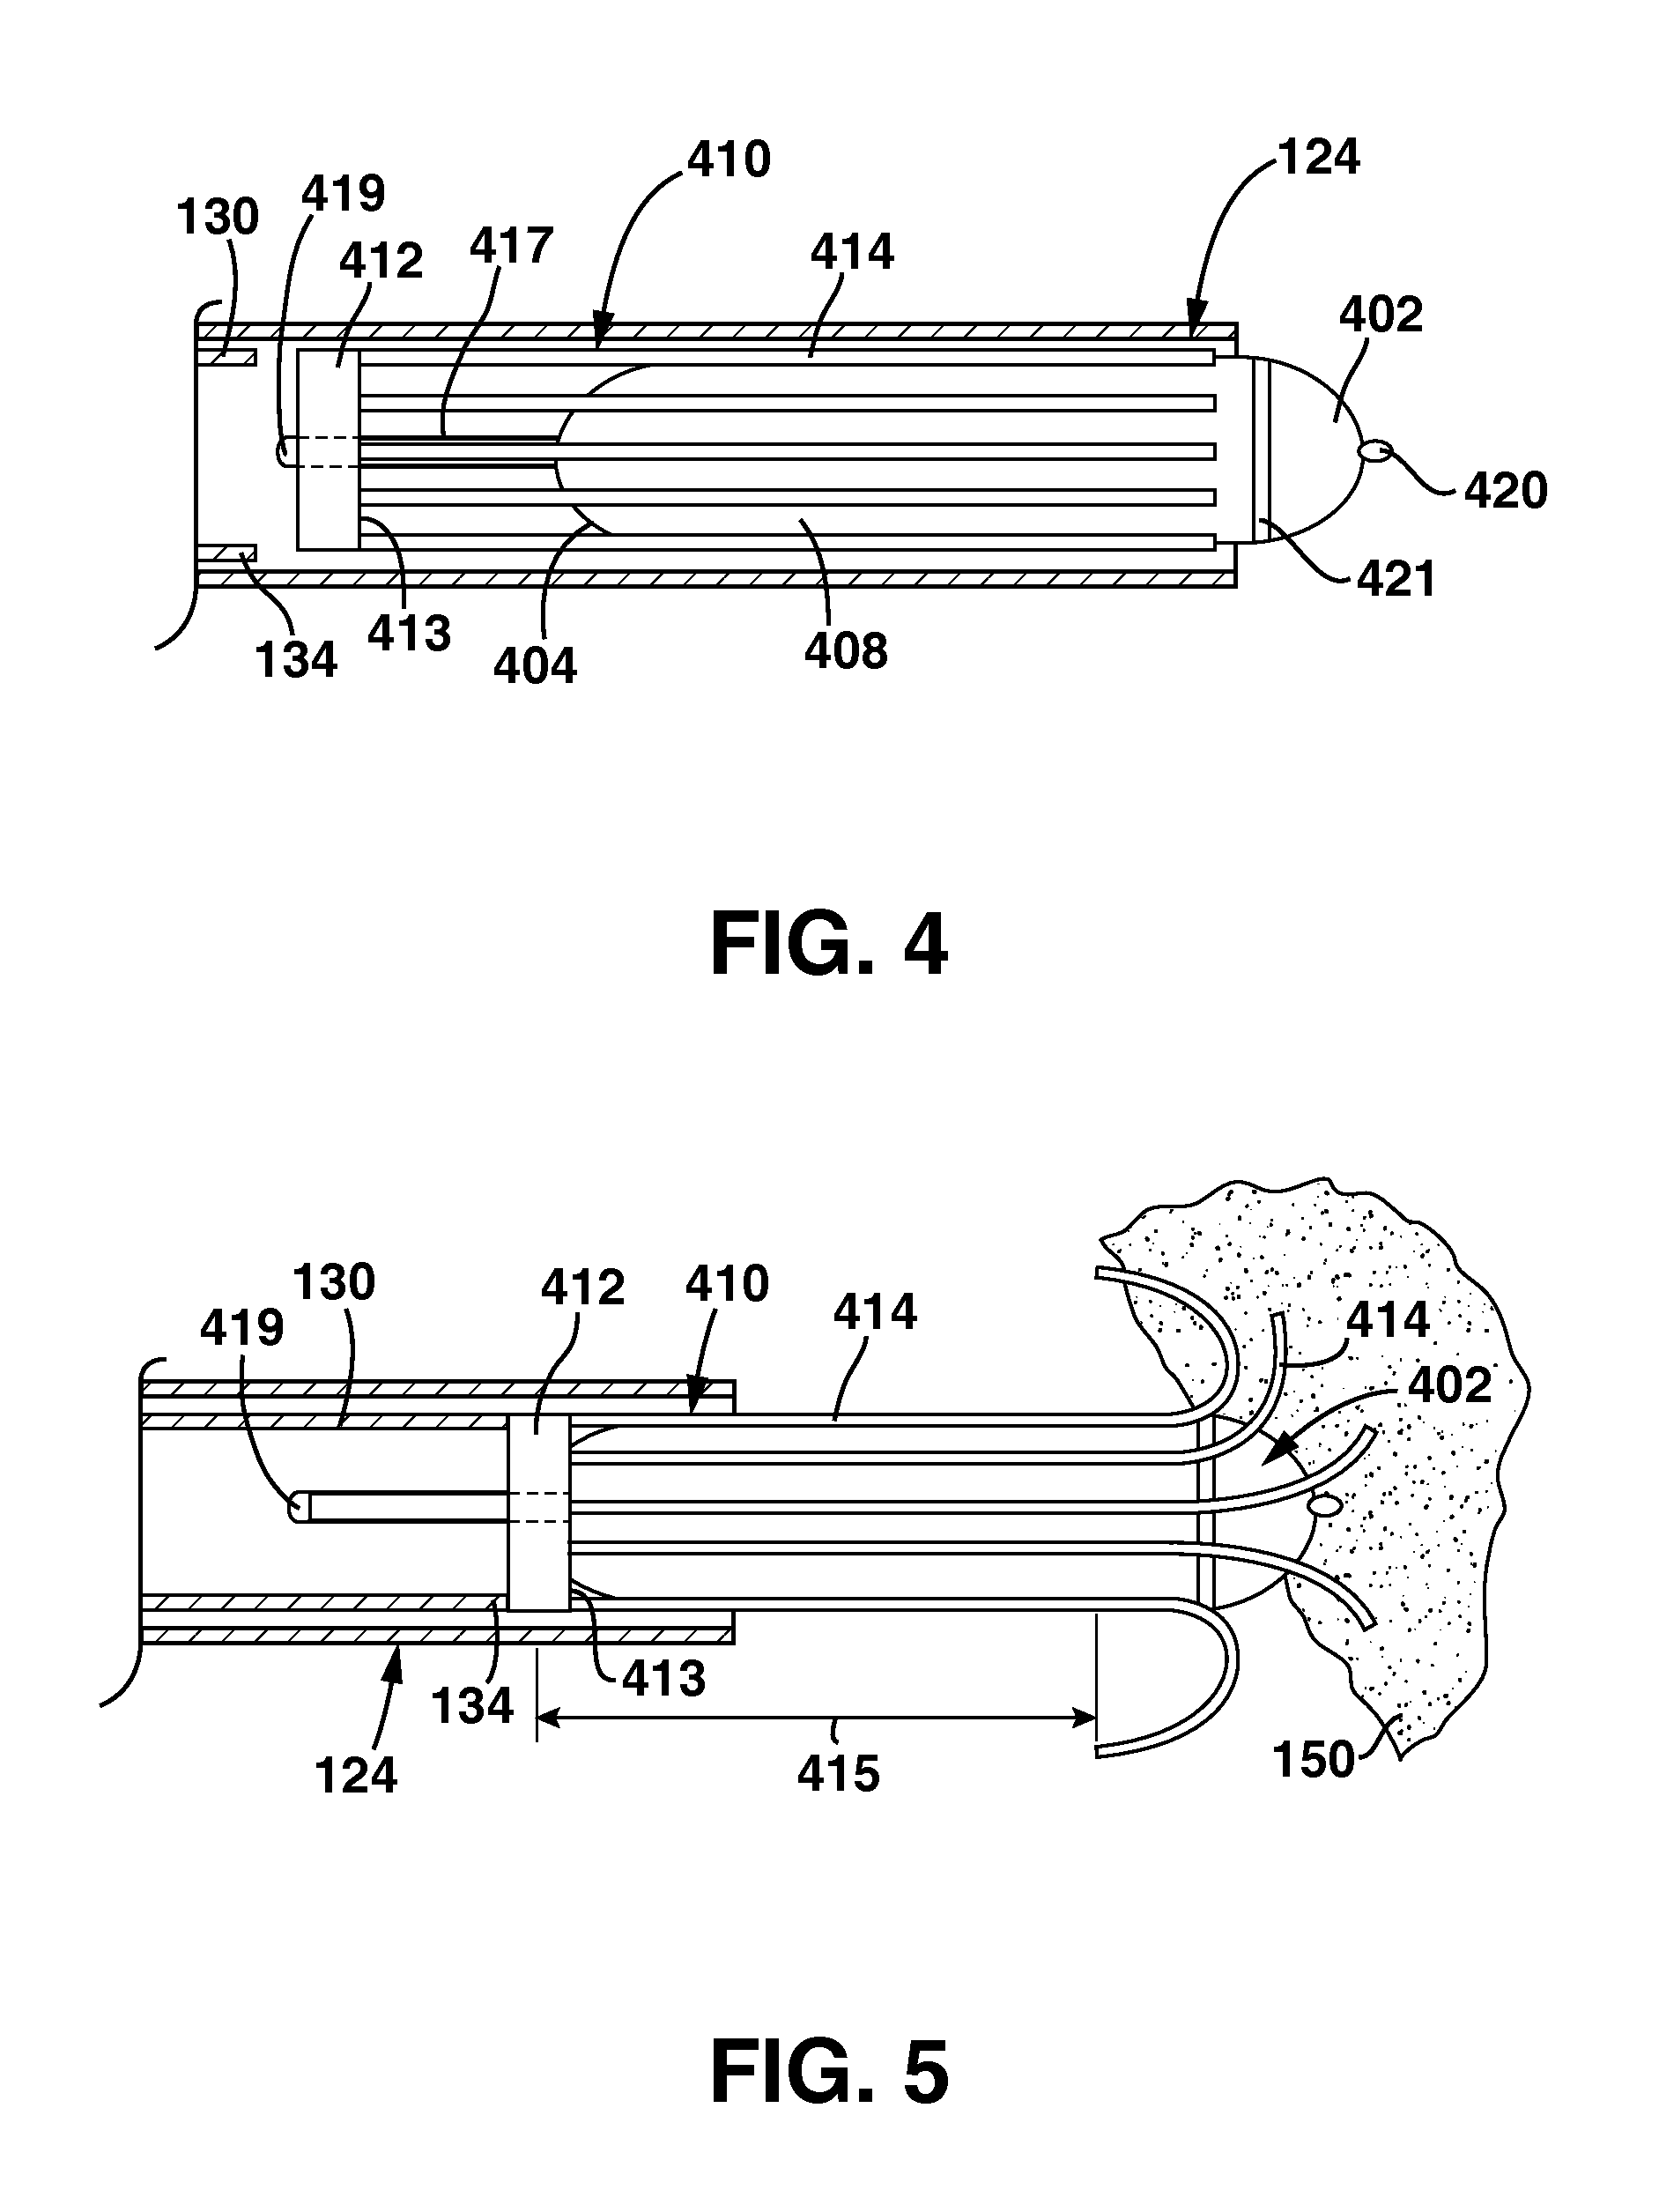 Slidable Fixation Device for Securing a Medical Implant